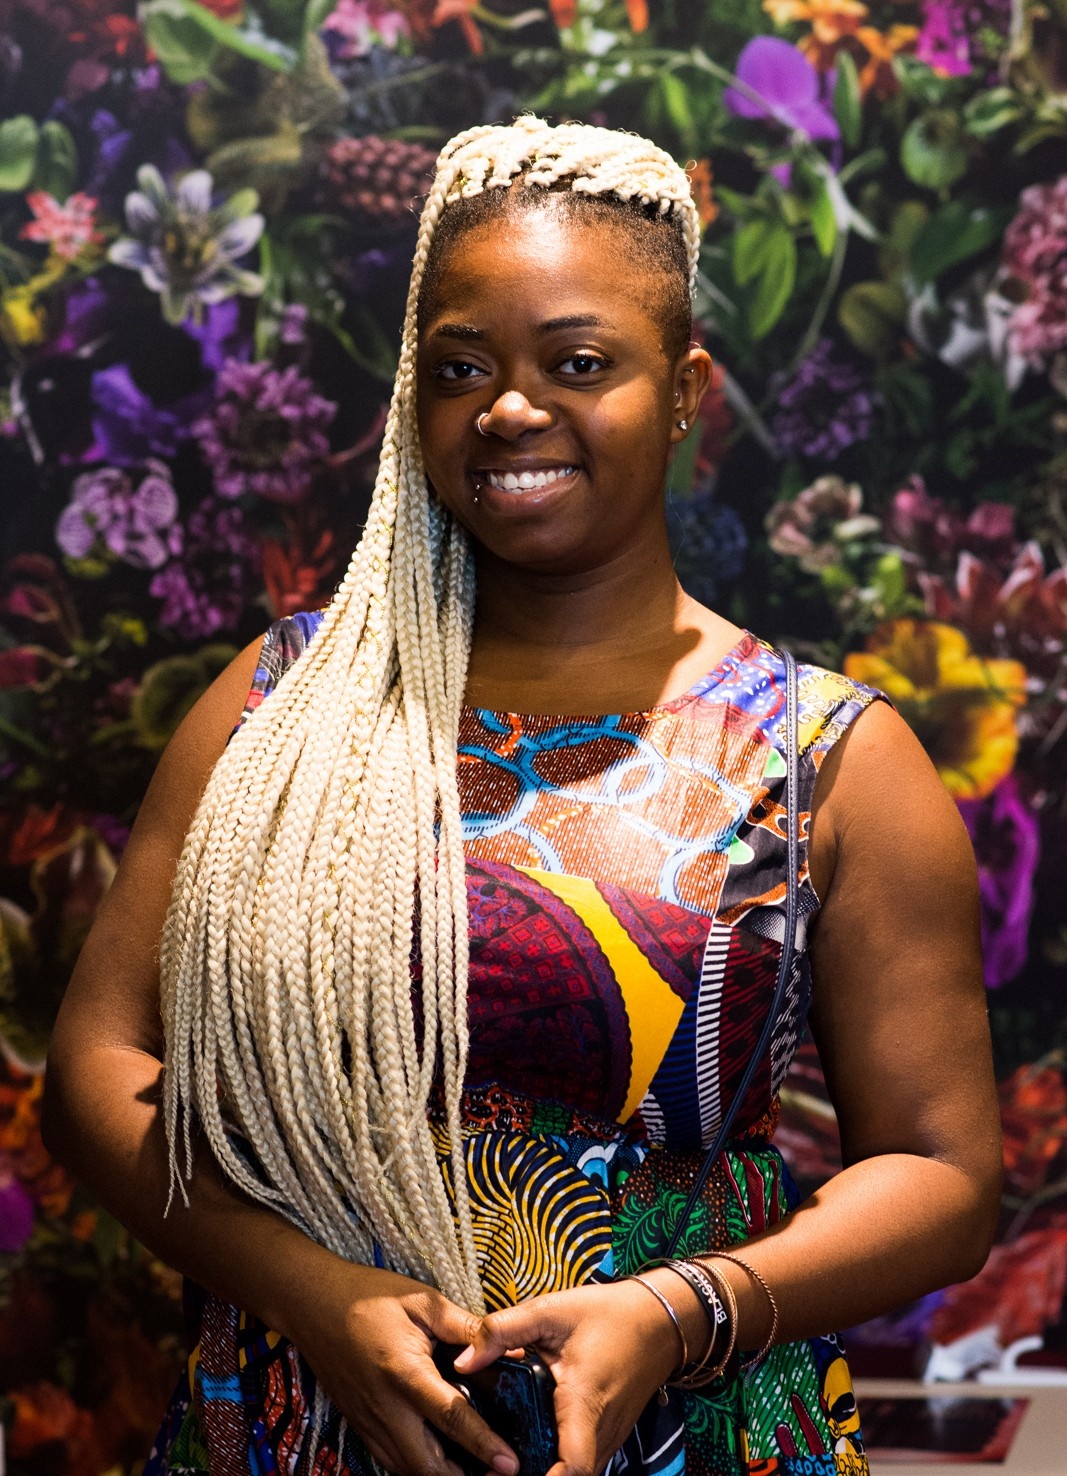 The artist Tasha Dougé smiling in a dress with a bright print against a floral background. Her hair is in braids down her shoulder and chest, and her hands are together in front of her waist.